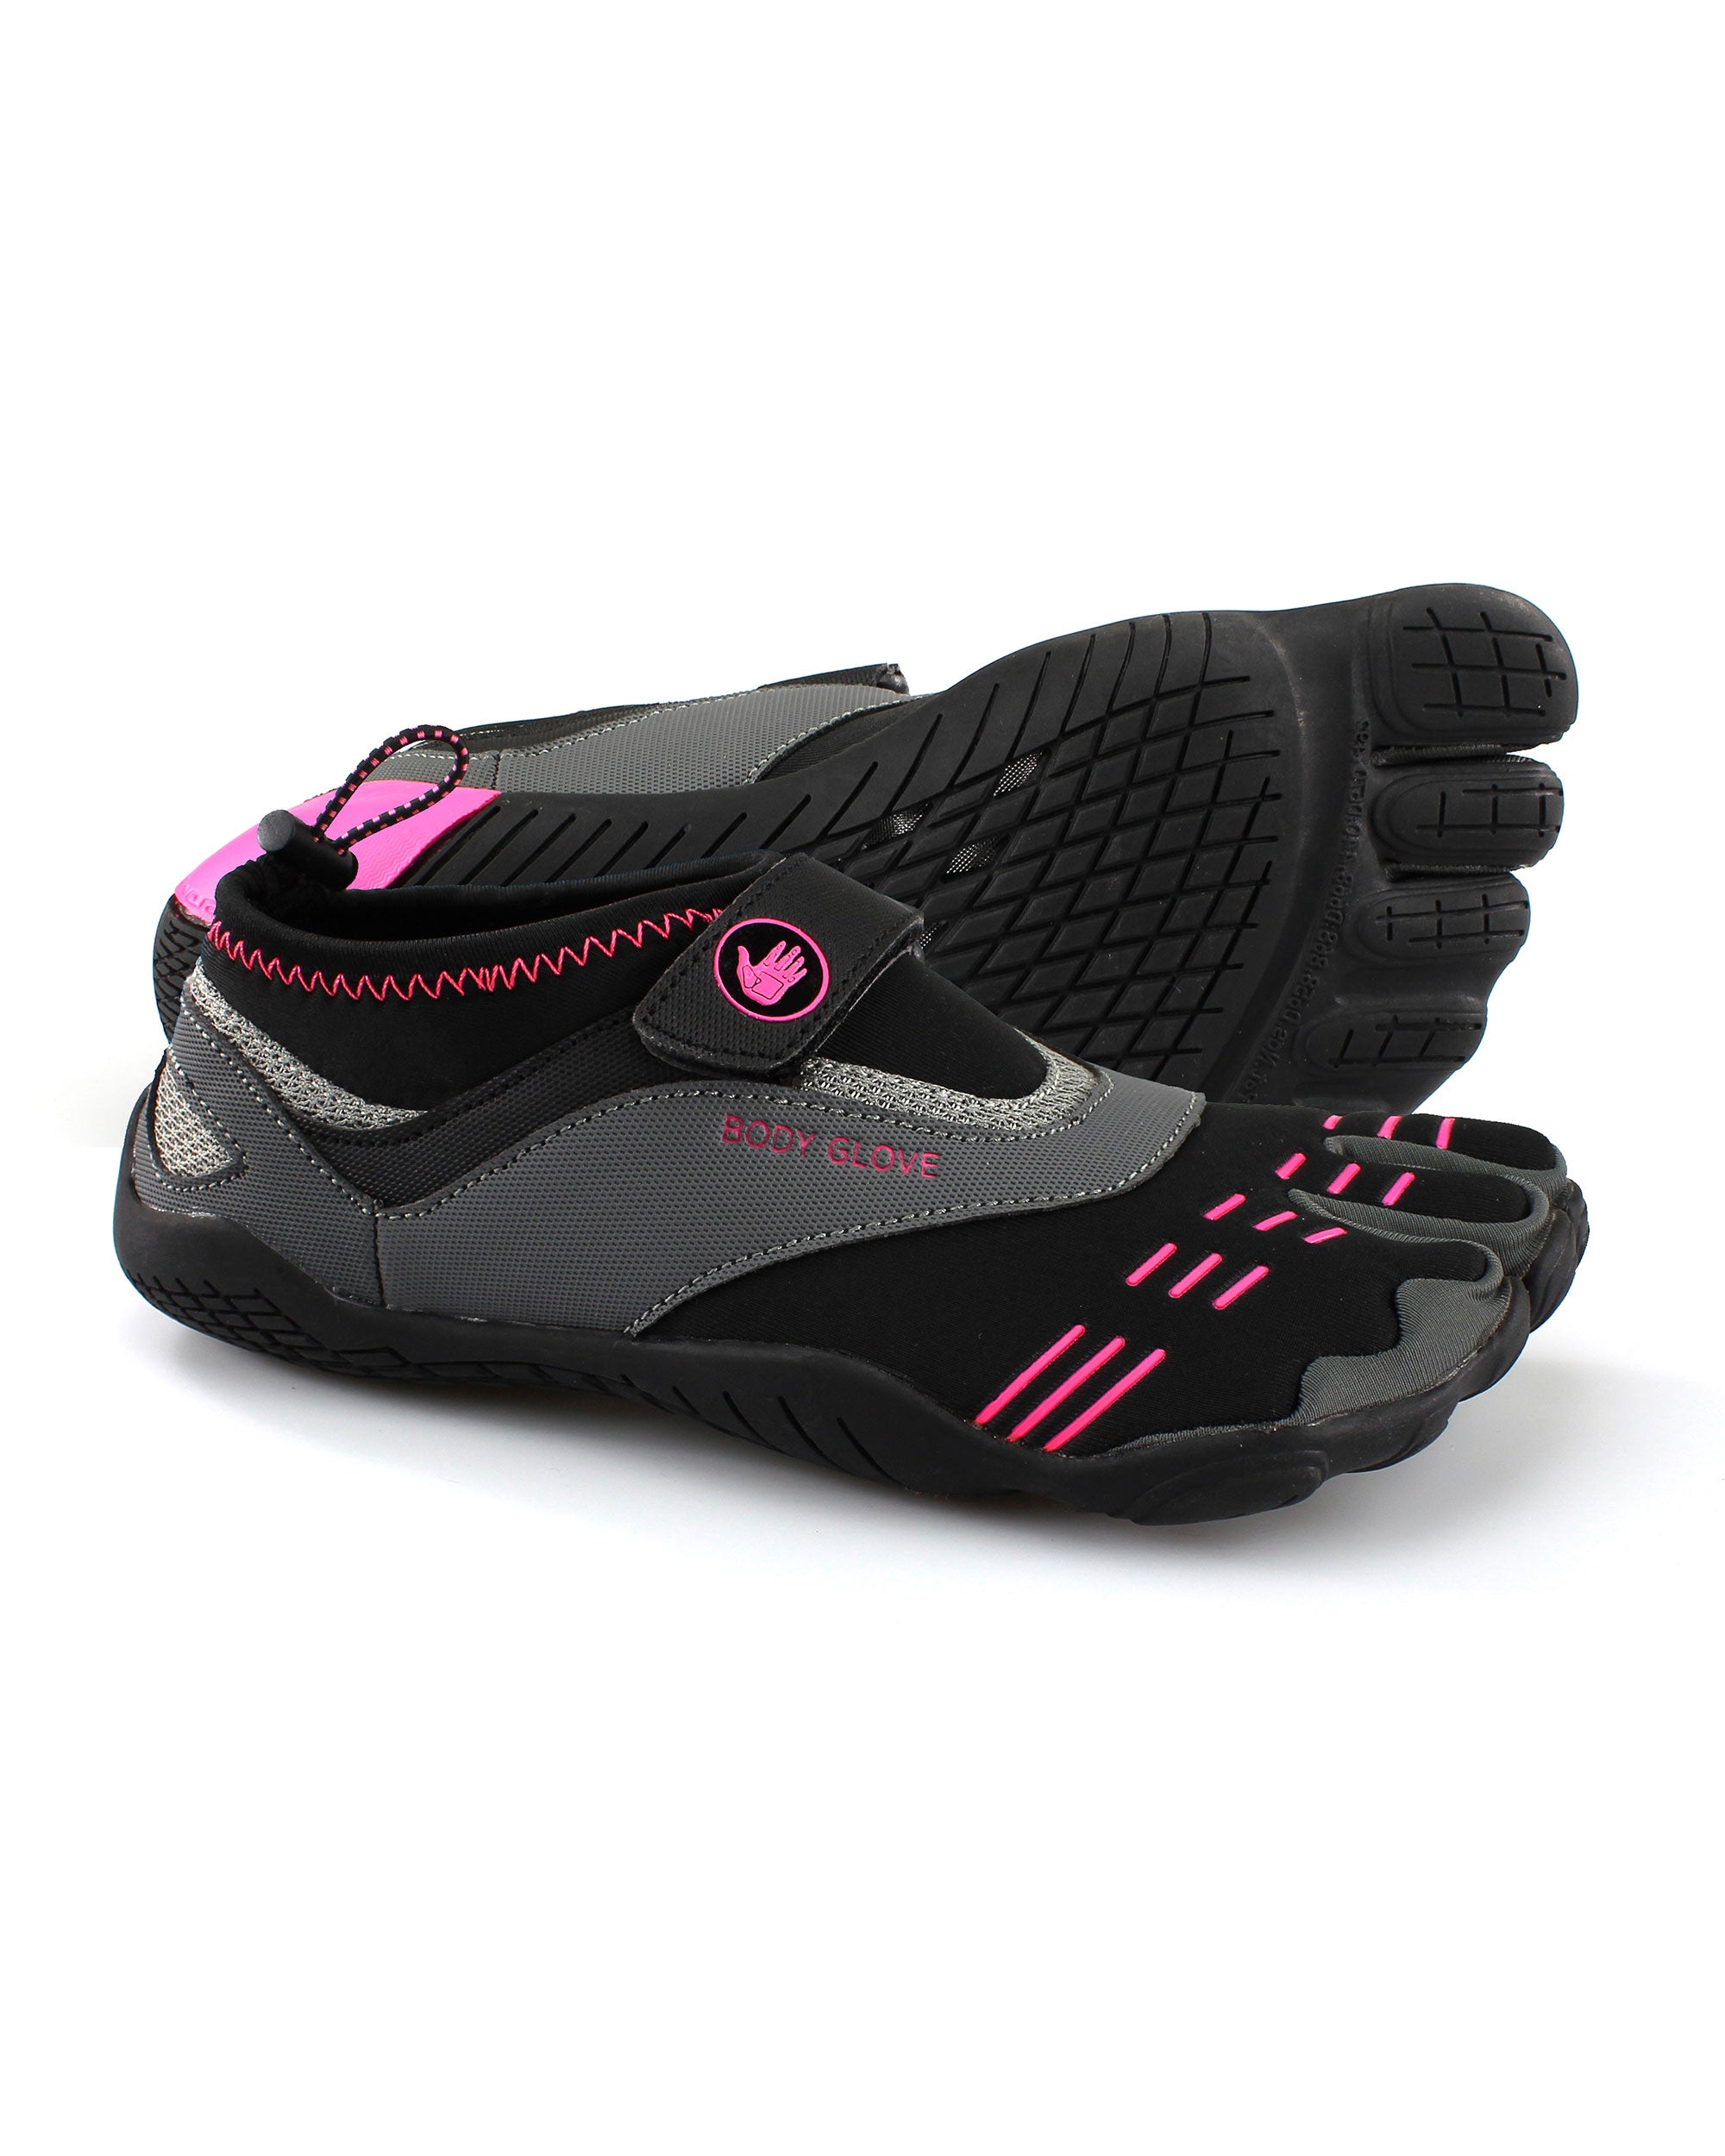 Women's 3T Barefoot Max Water Shoes 